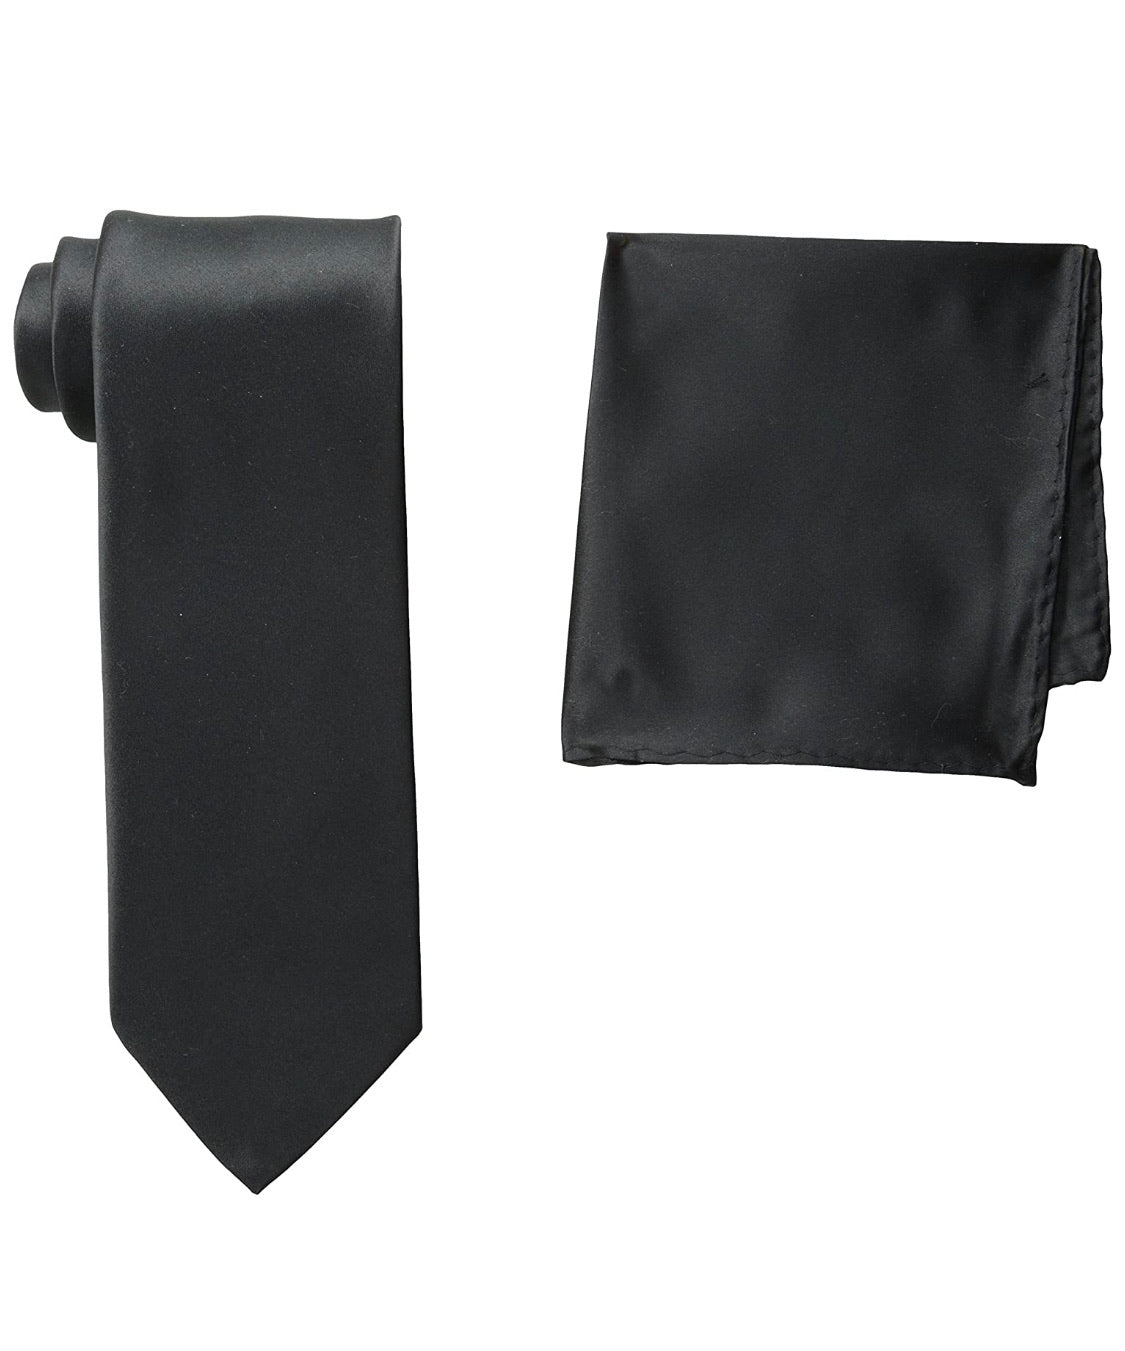 Stacy Adams Solid Black Tie and Hanky - On Time Fashions Tuscaloosa